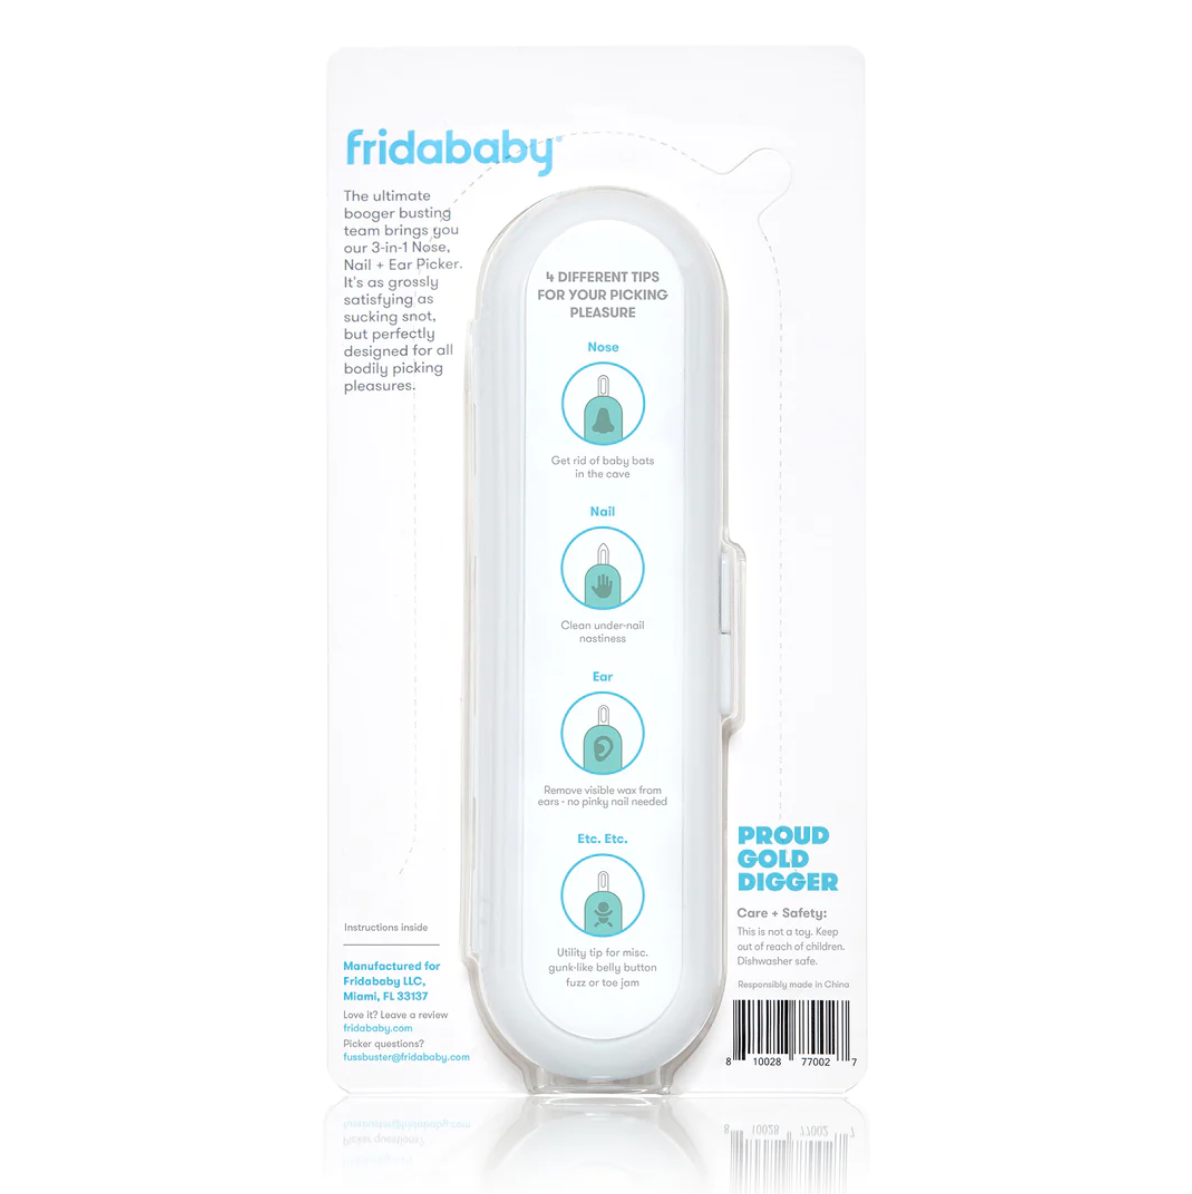 FridaBaby - 3 in 1 Nose Nail + Ear Picker